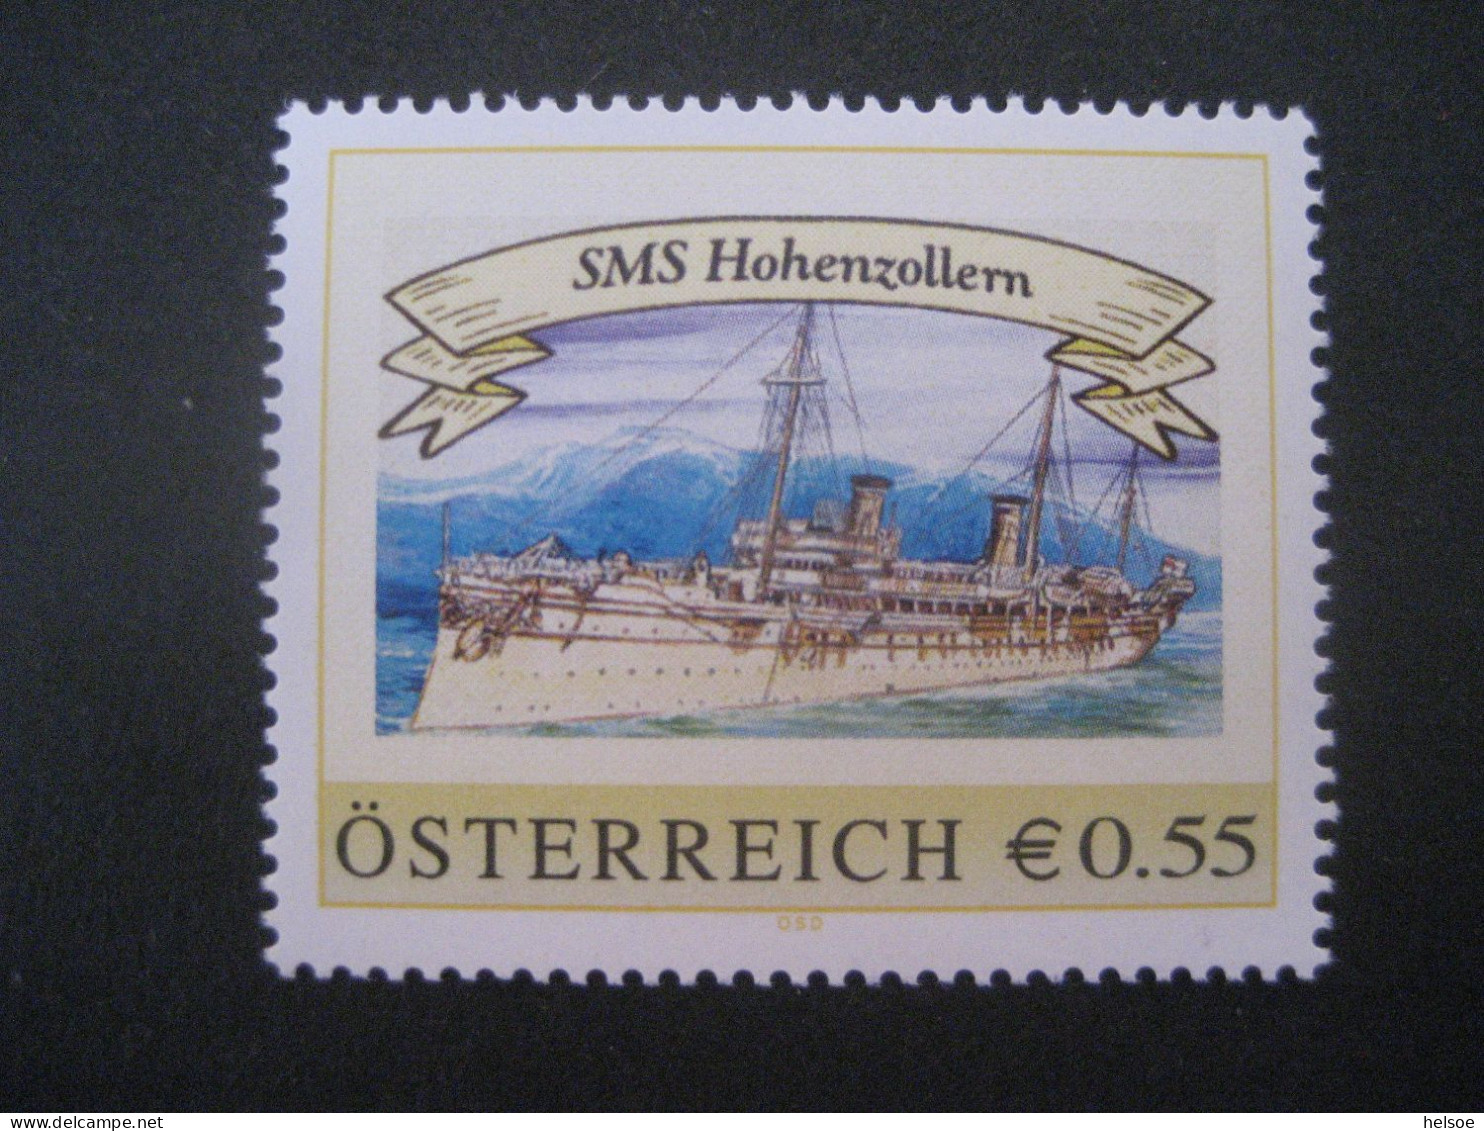 Österreich- PM 8006307, SMS Hohenzollern ** - Timbres Personnalisés